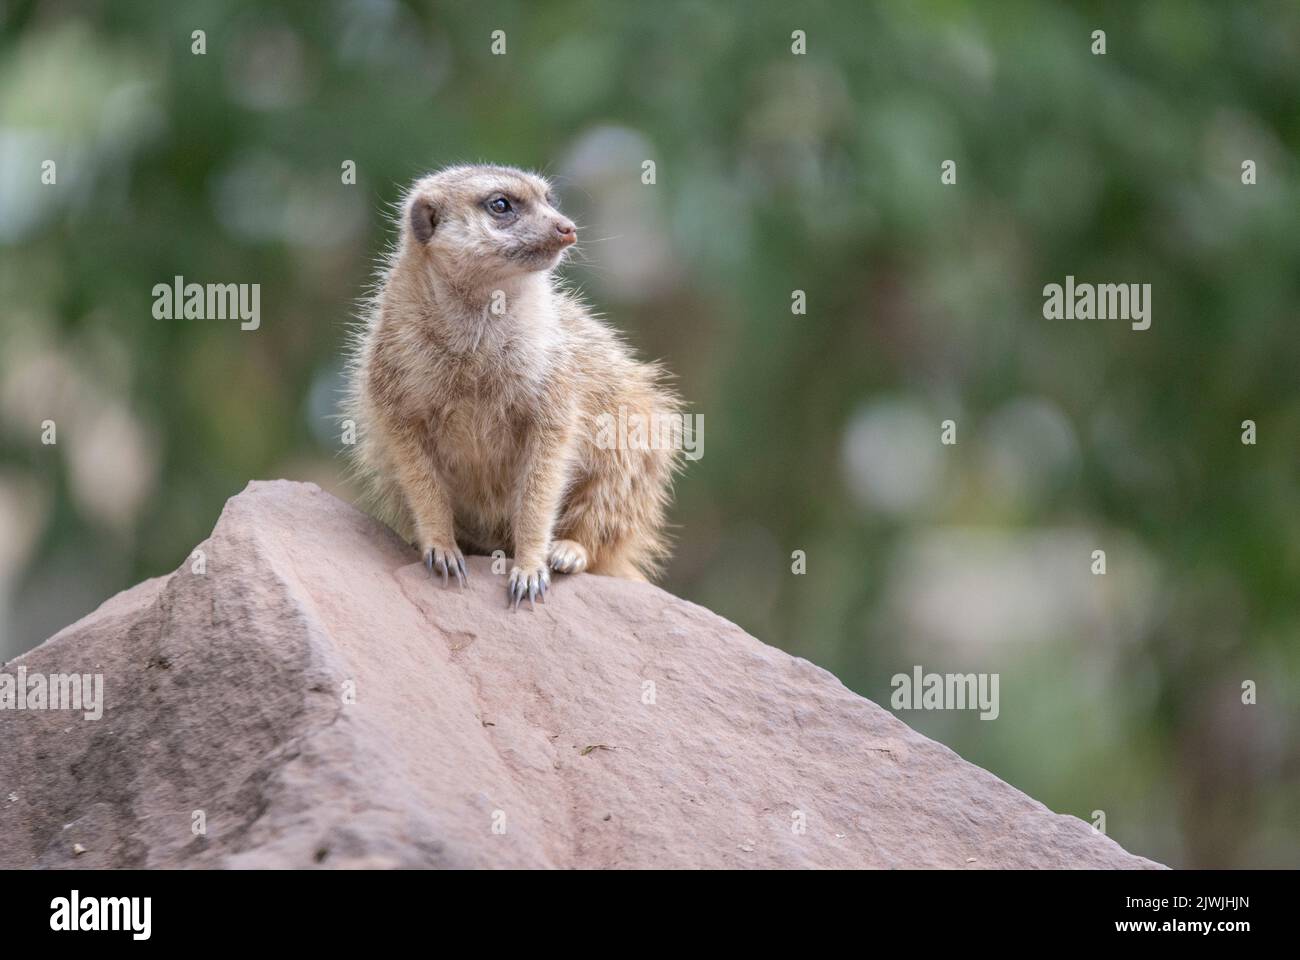 The meerkat, also called suricates or outdated Scharrtier, is a species of mammal from the mongoose family Stock Photo